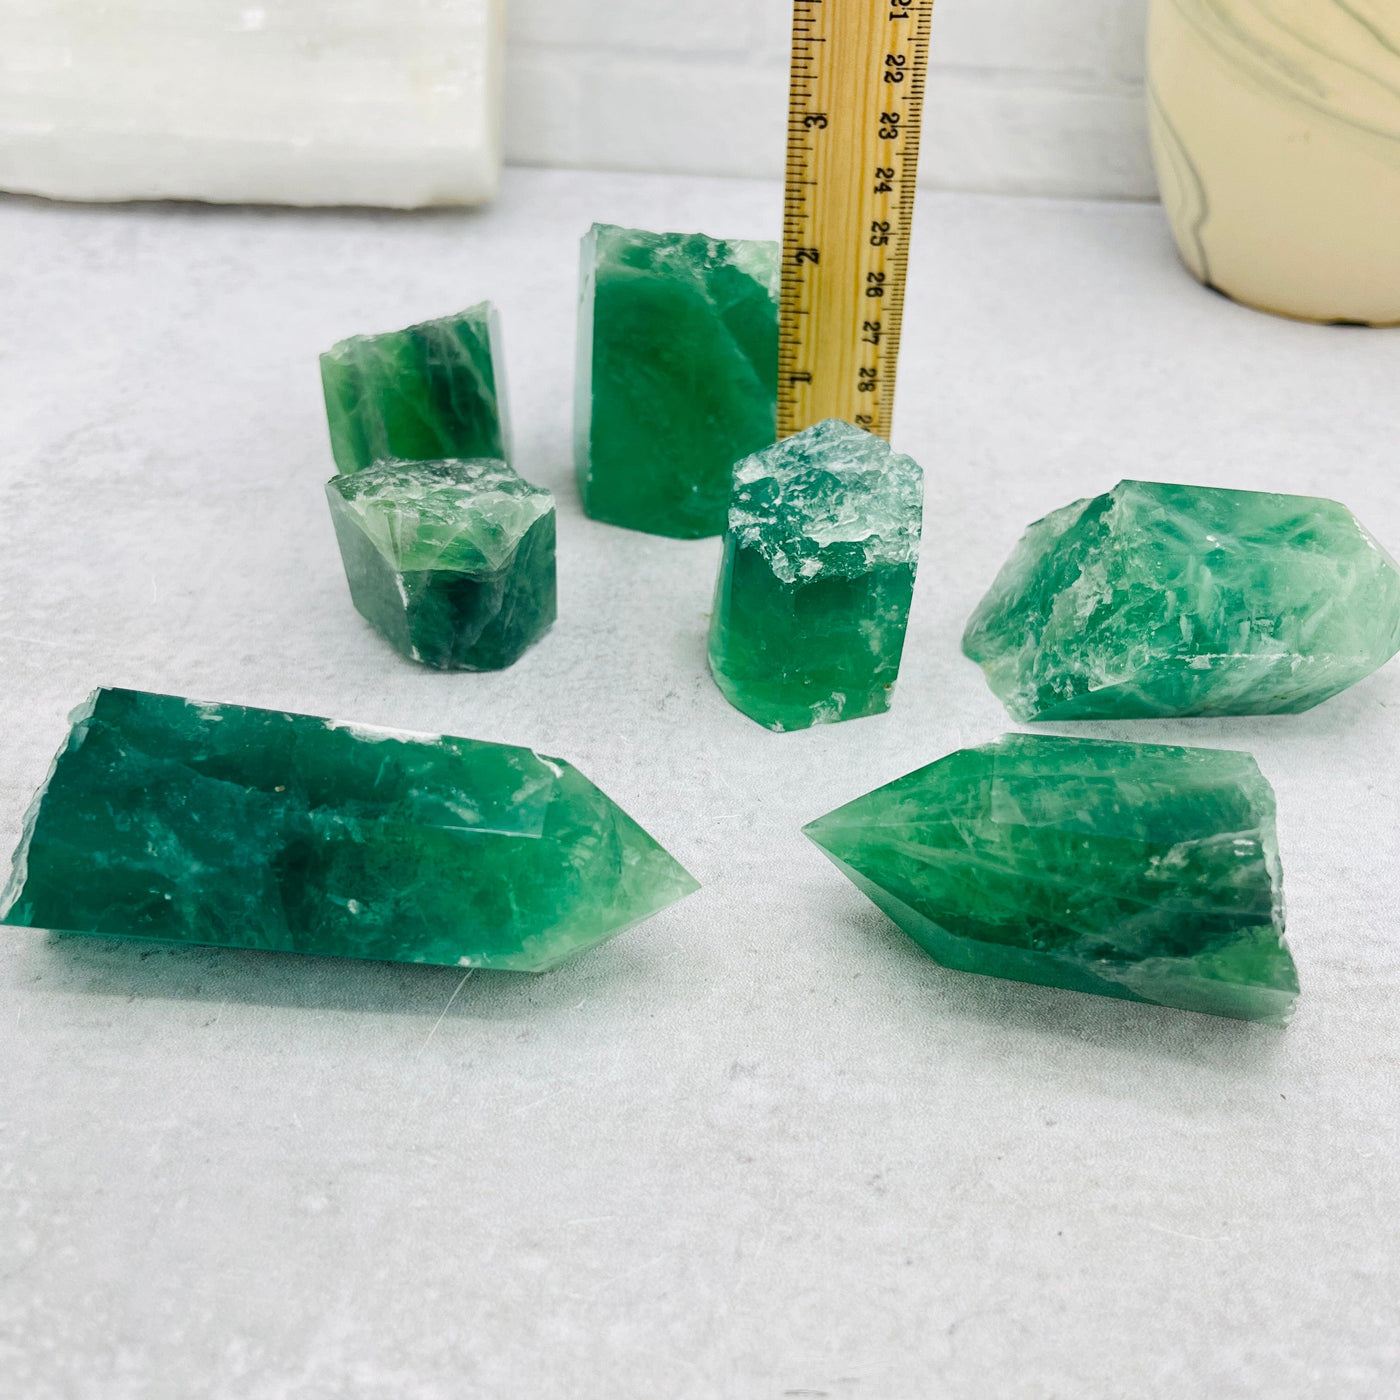  Green Fluorite Crafters 2.5lb Bag - With Measurements